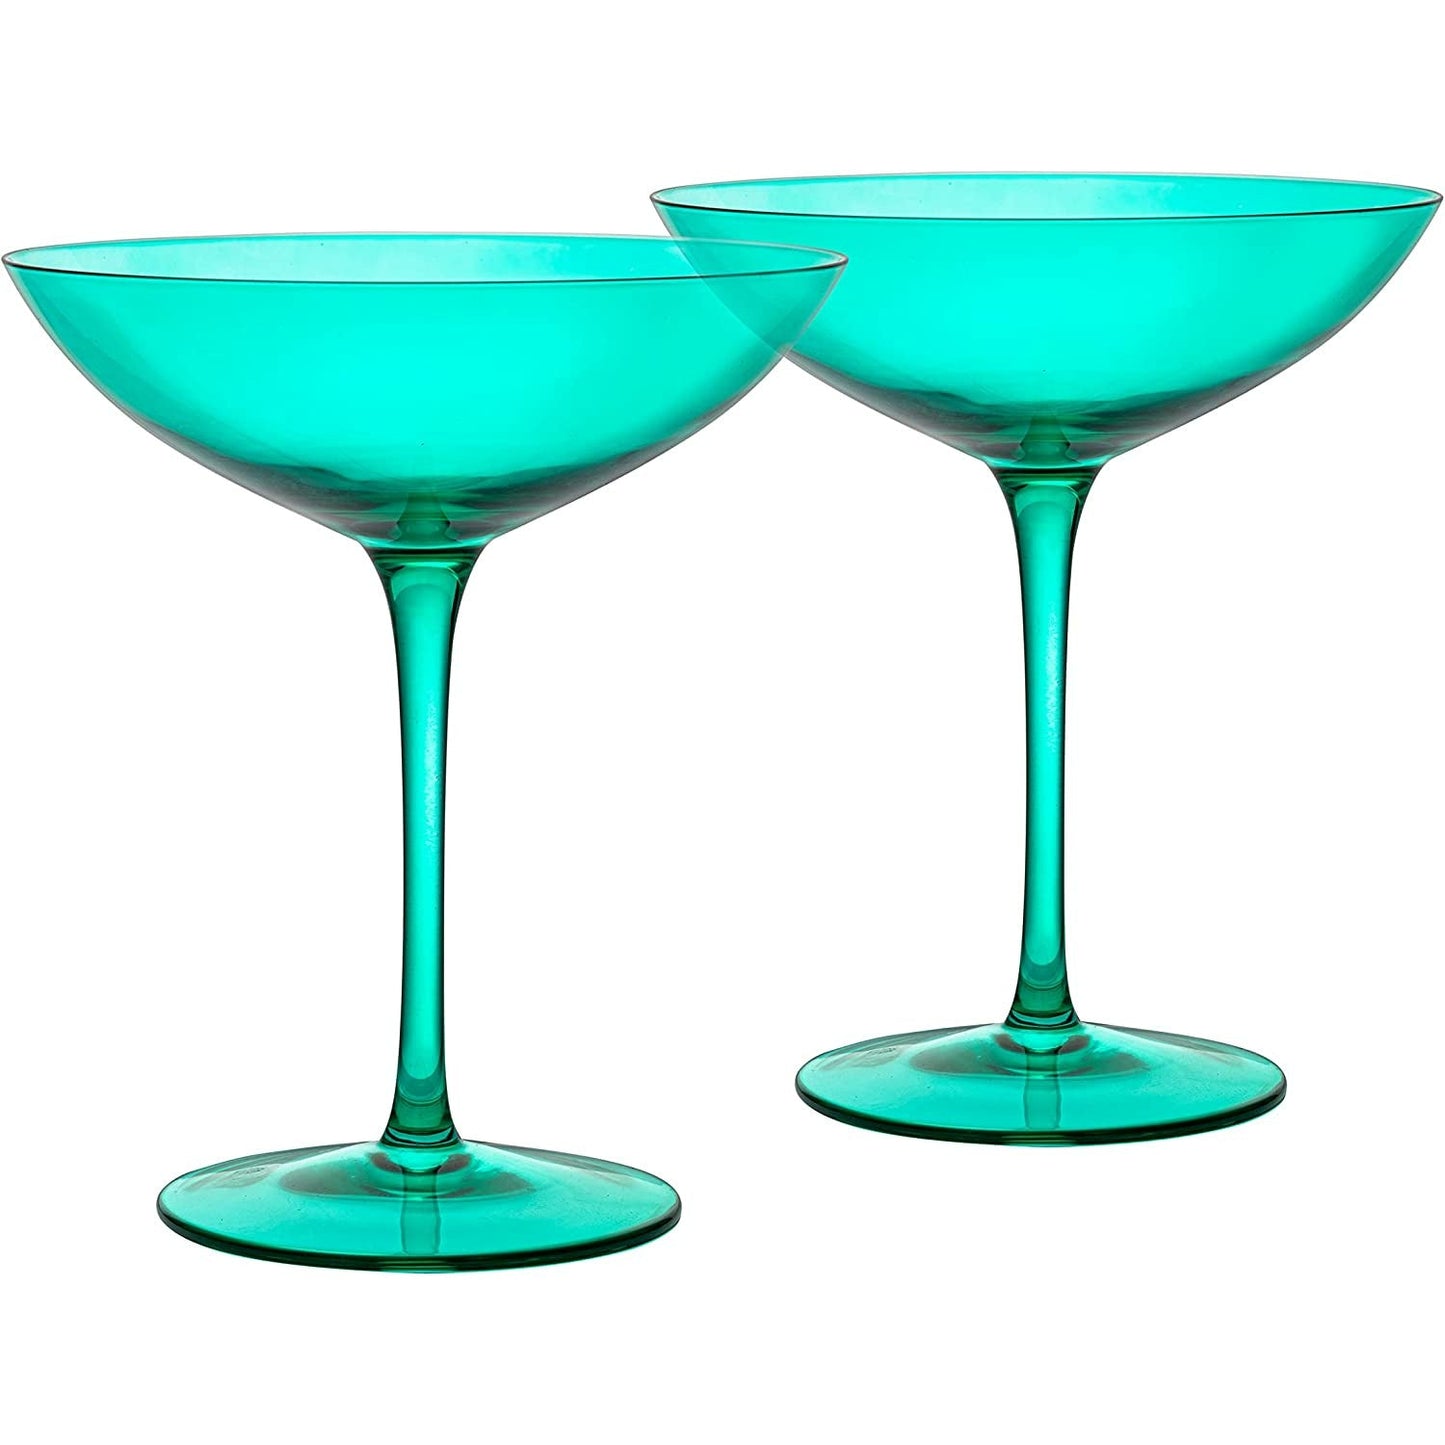 Corse Coupe Cocktail Glassware, Set of 2, Teal